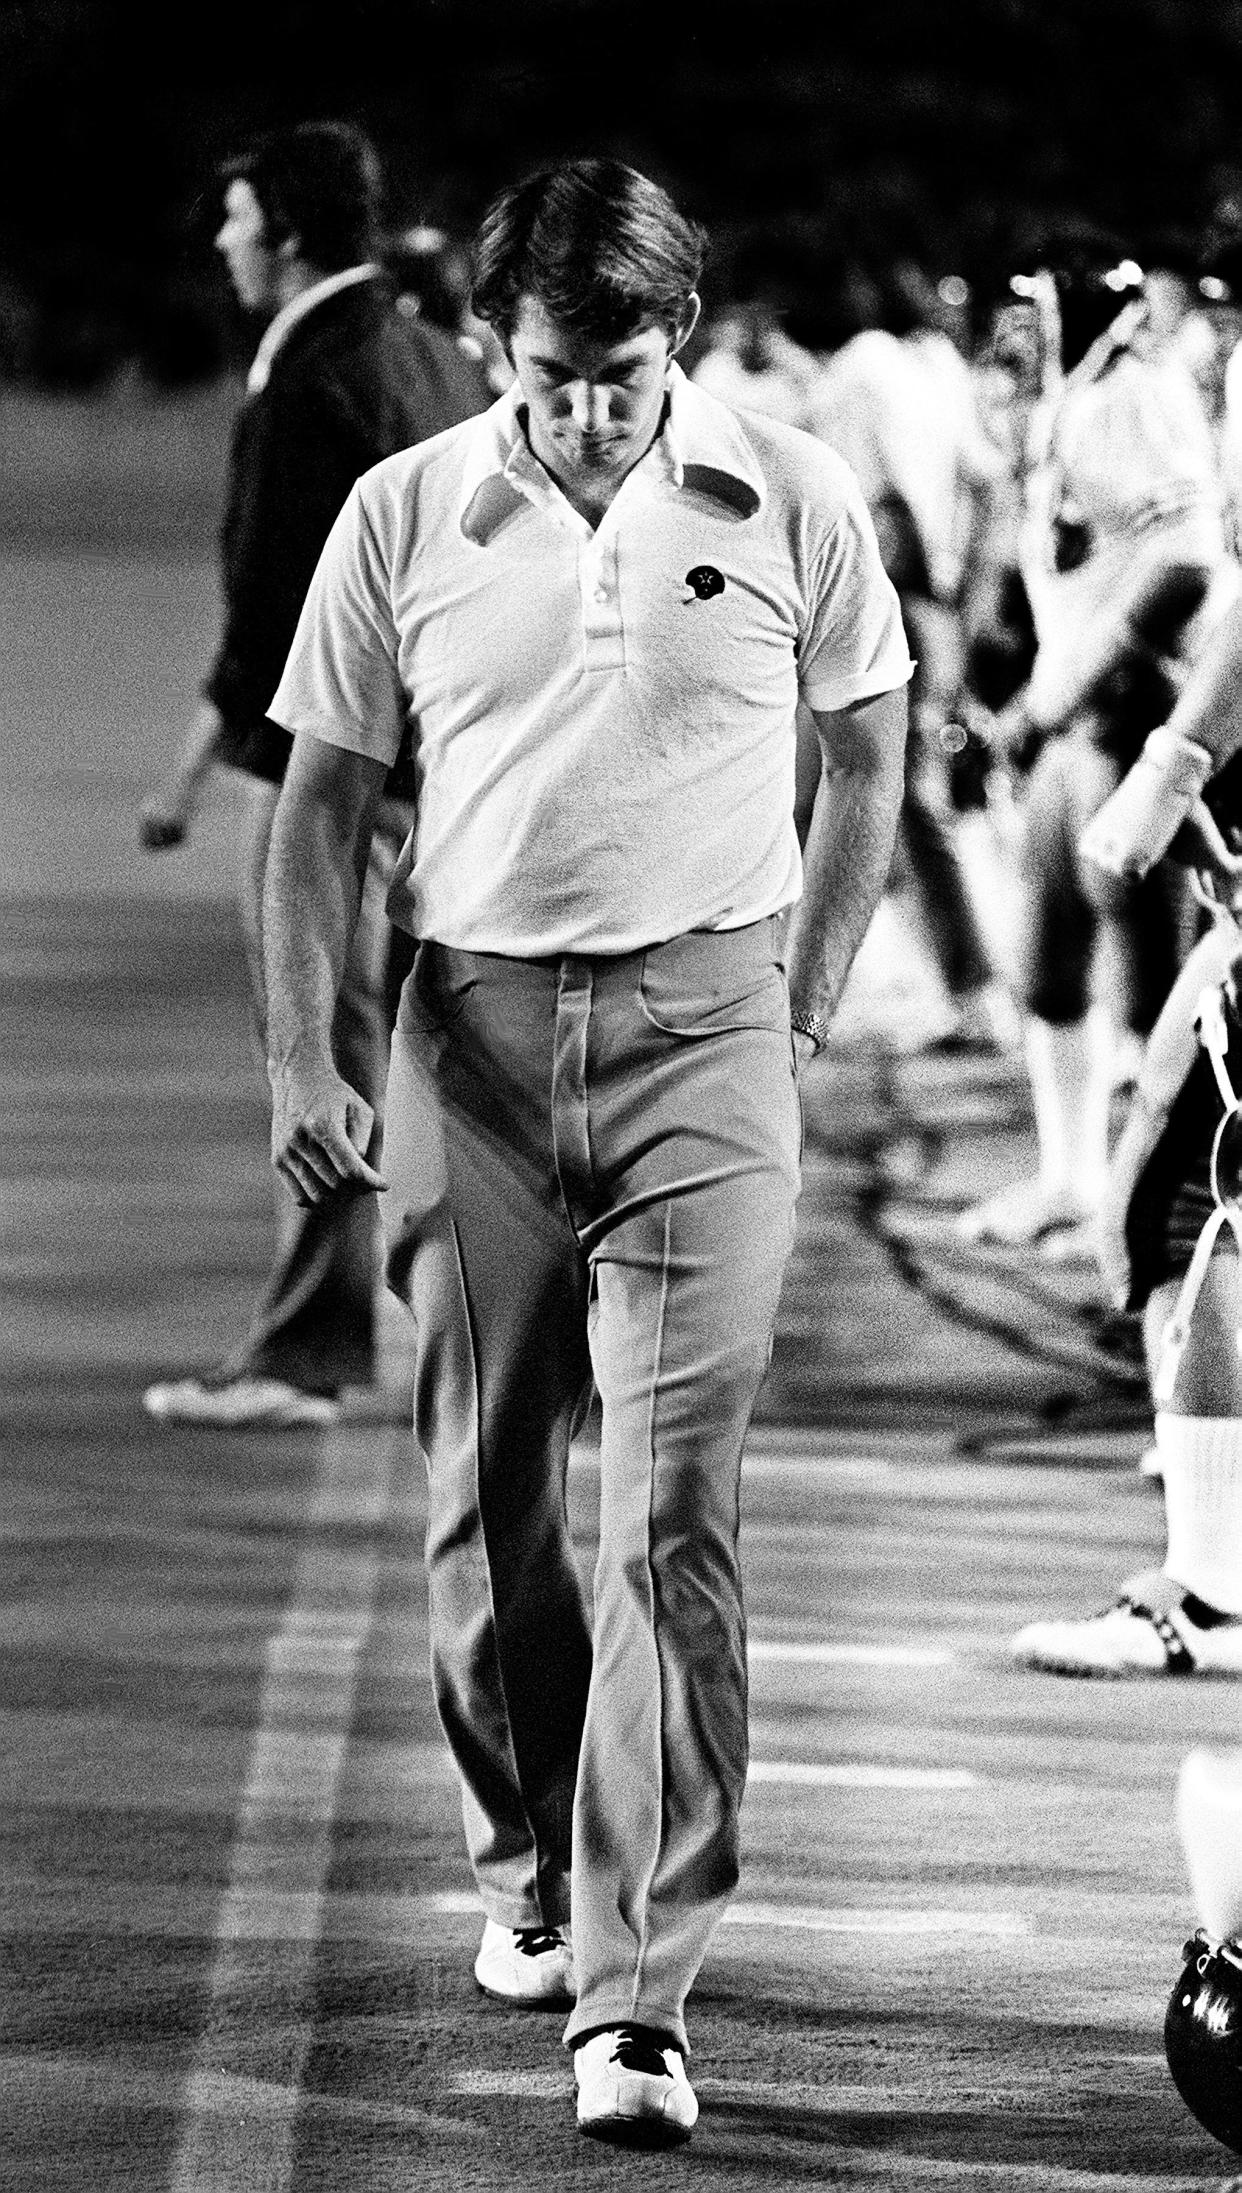 Vanderbilt coach Steve Sloan walks a dejected path along the sidelines as he team is taking a beating at the hands of Alabama on Sept. 29, 1973. The fifth-ranked Crimson Tide defeated Vanderbilt 44-0 before 34,000 at Dudley Field.